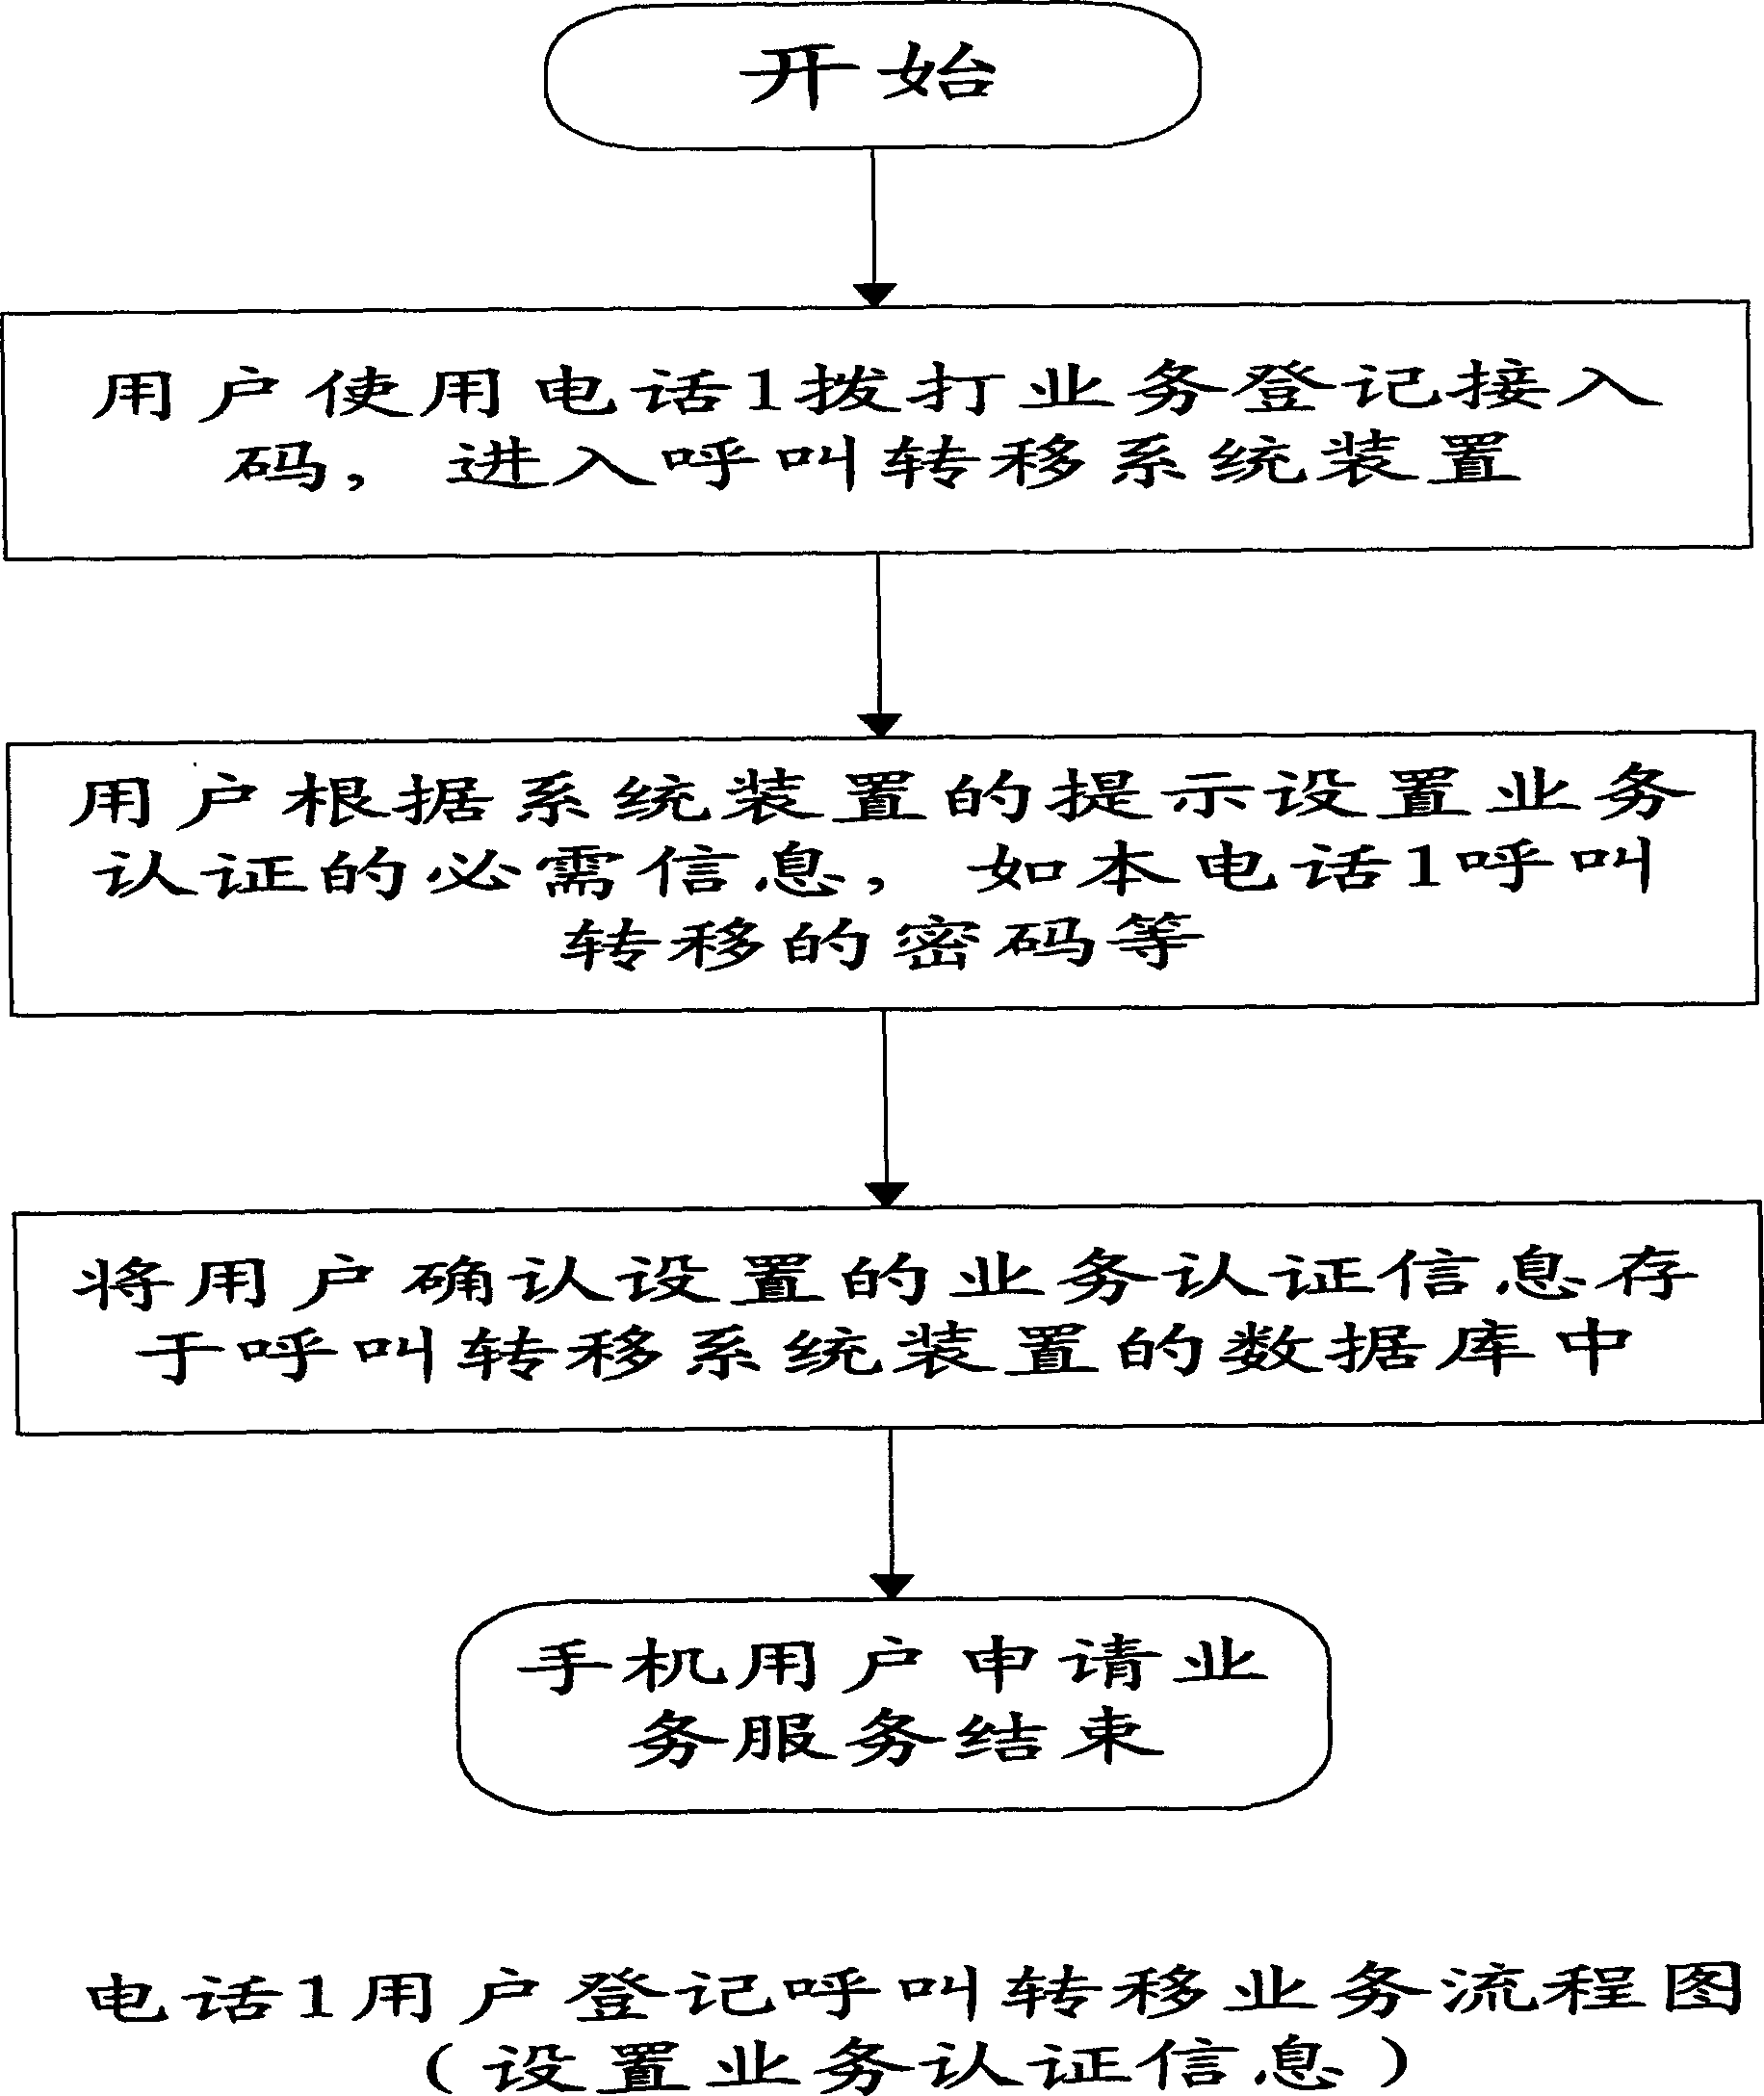 Method for network system of telecommunication operation trader to provide calling transfer for users of other telecommunication network